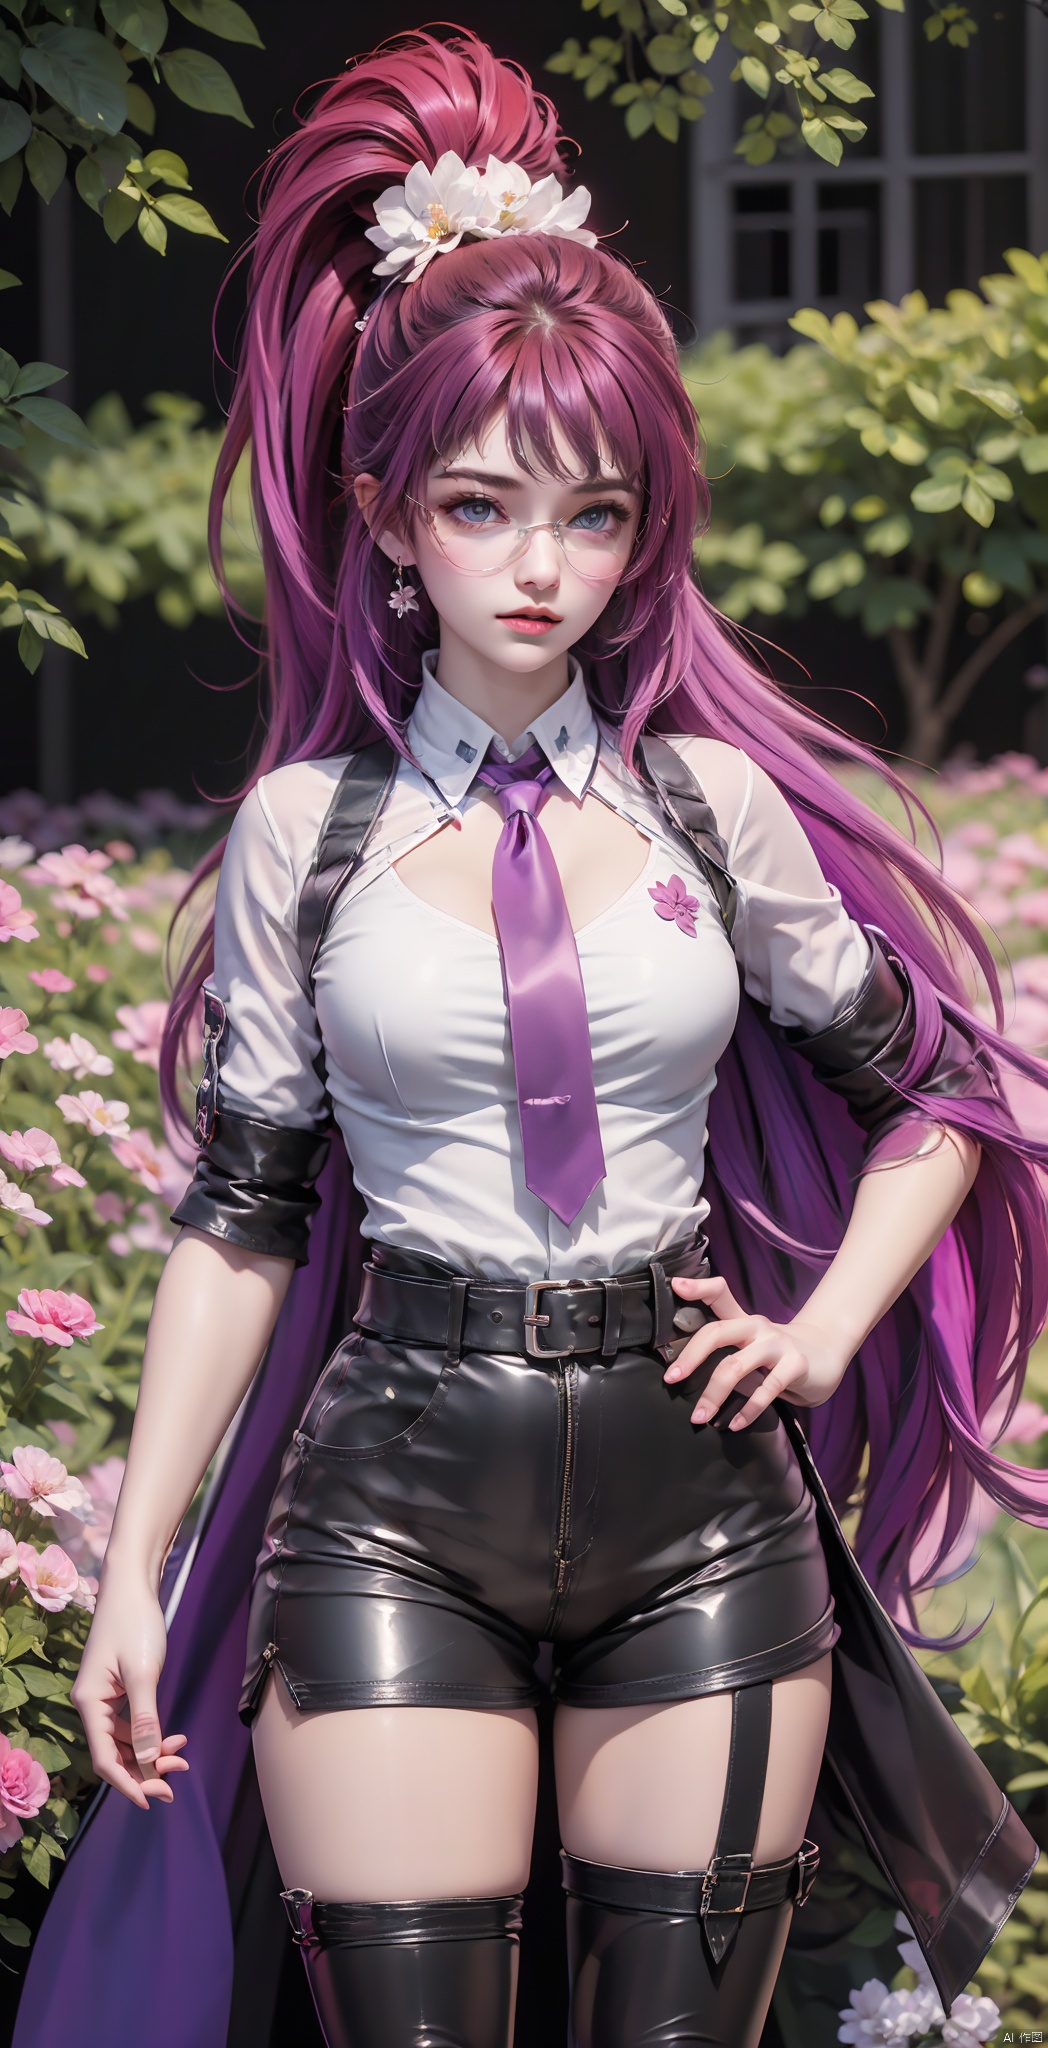 1 Girl, Solo, (Upper Body: 1.3), Long Hair, Looking at the Audience, Shirt, Thigh Height, Medium Breasts, Standing, Full Body, White Shirt, Ponytail, Pink Hair, Purple Hair, Short Sleeves, Boots, Outdoor, Split Sleeves, Tie, Shorts, Shiny, Collared Shirt, Belt, Black Thigh Heels, Black Shoes, High Heels, Lips, Jacket, Shorts, Thigh Boots, Garter, Black Shorts, Sunglasses, High Ponytail, Glasses on Head, High Heeled Boots, Shiny Clothes, Hands on the hips,  Purple tie, (Flower field background: 1.3)